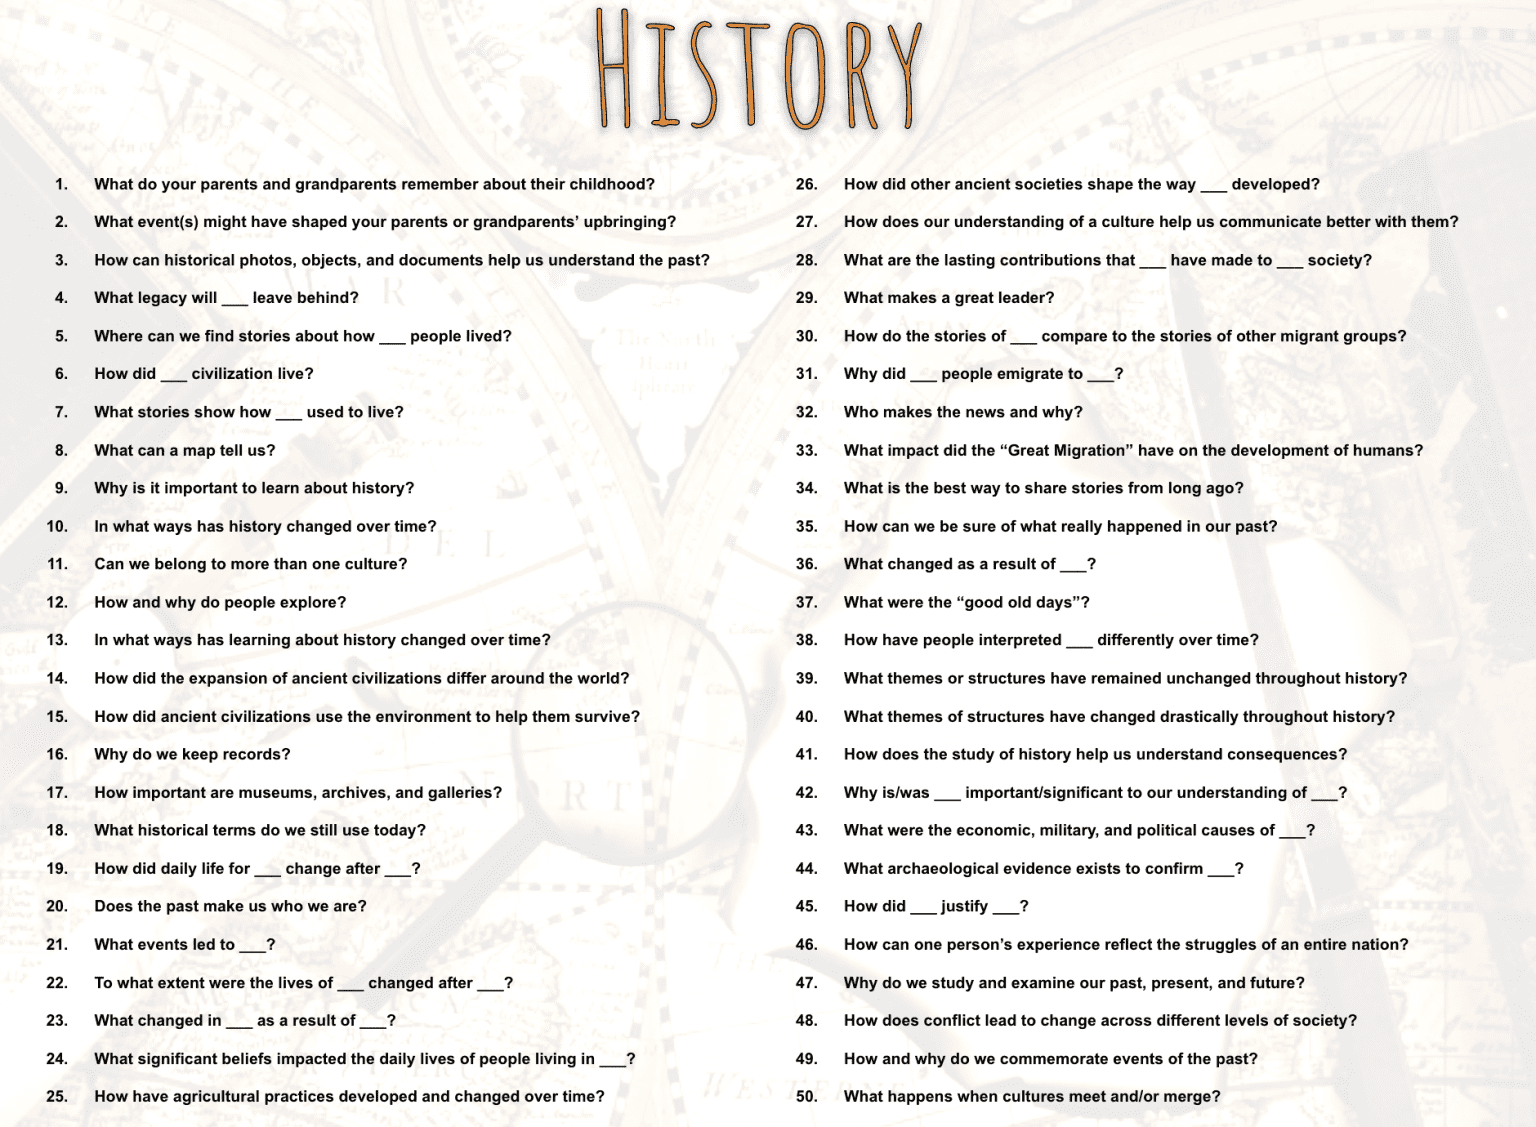 research questions for history